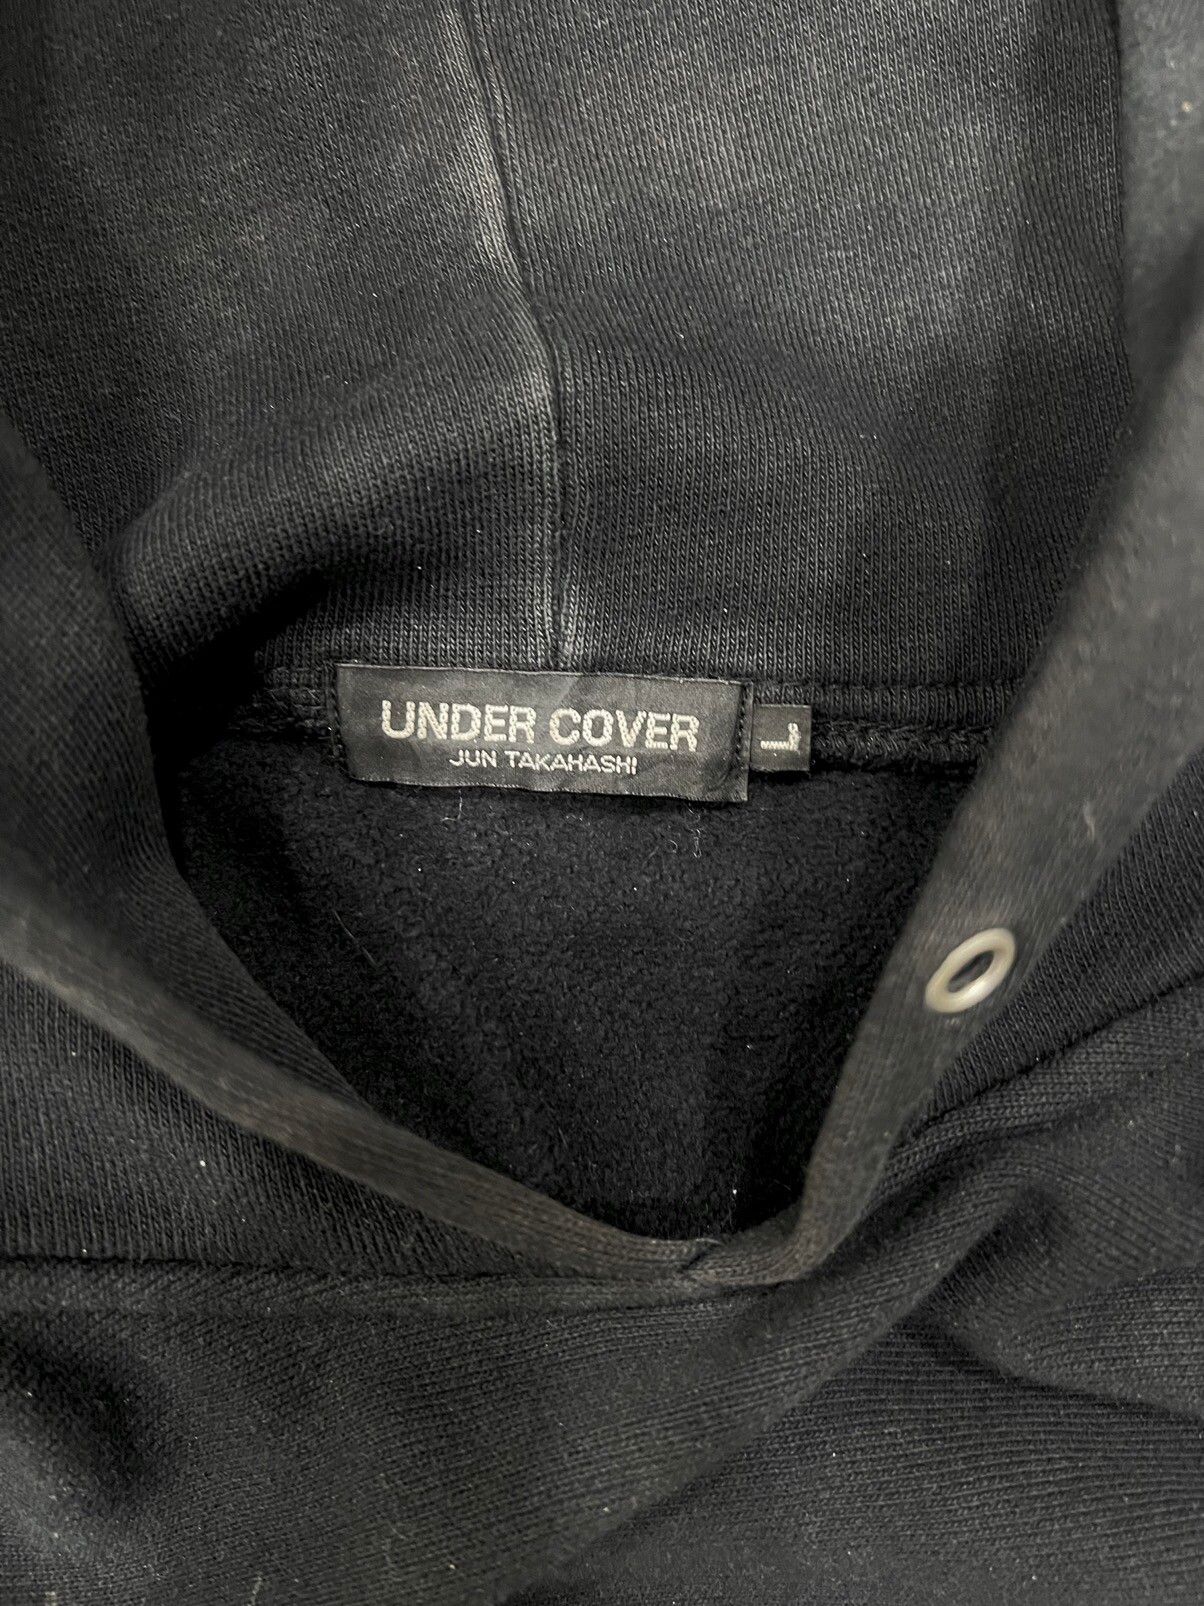 Undercover Undercover Groupie Hoodie Size US L / EU 52-54 / 3 - 5 Preview